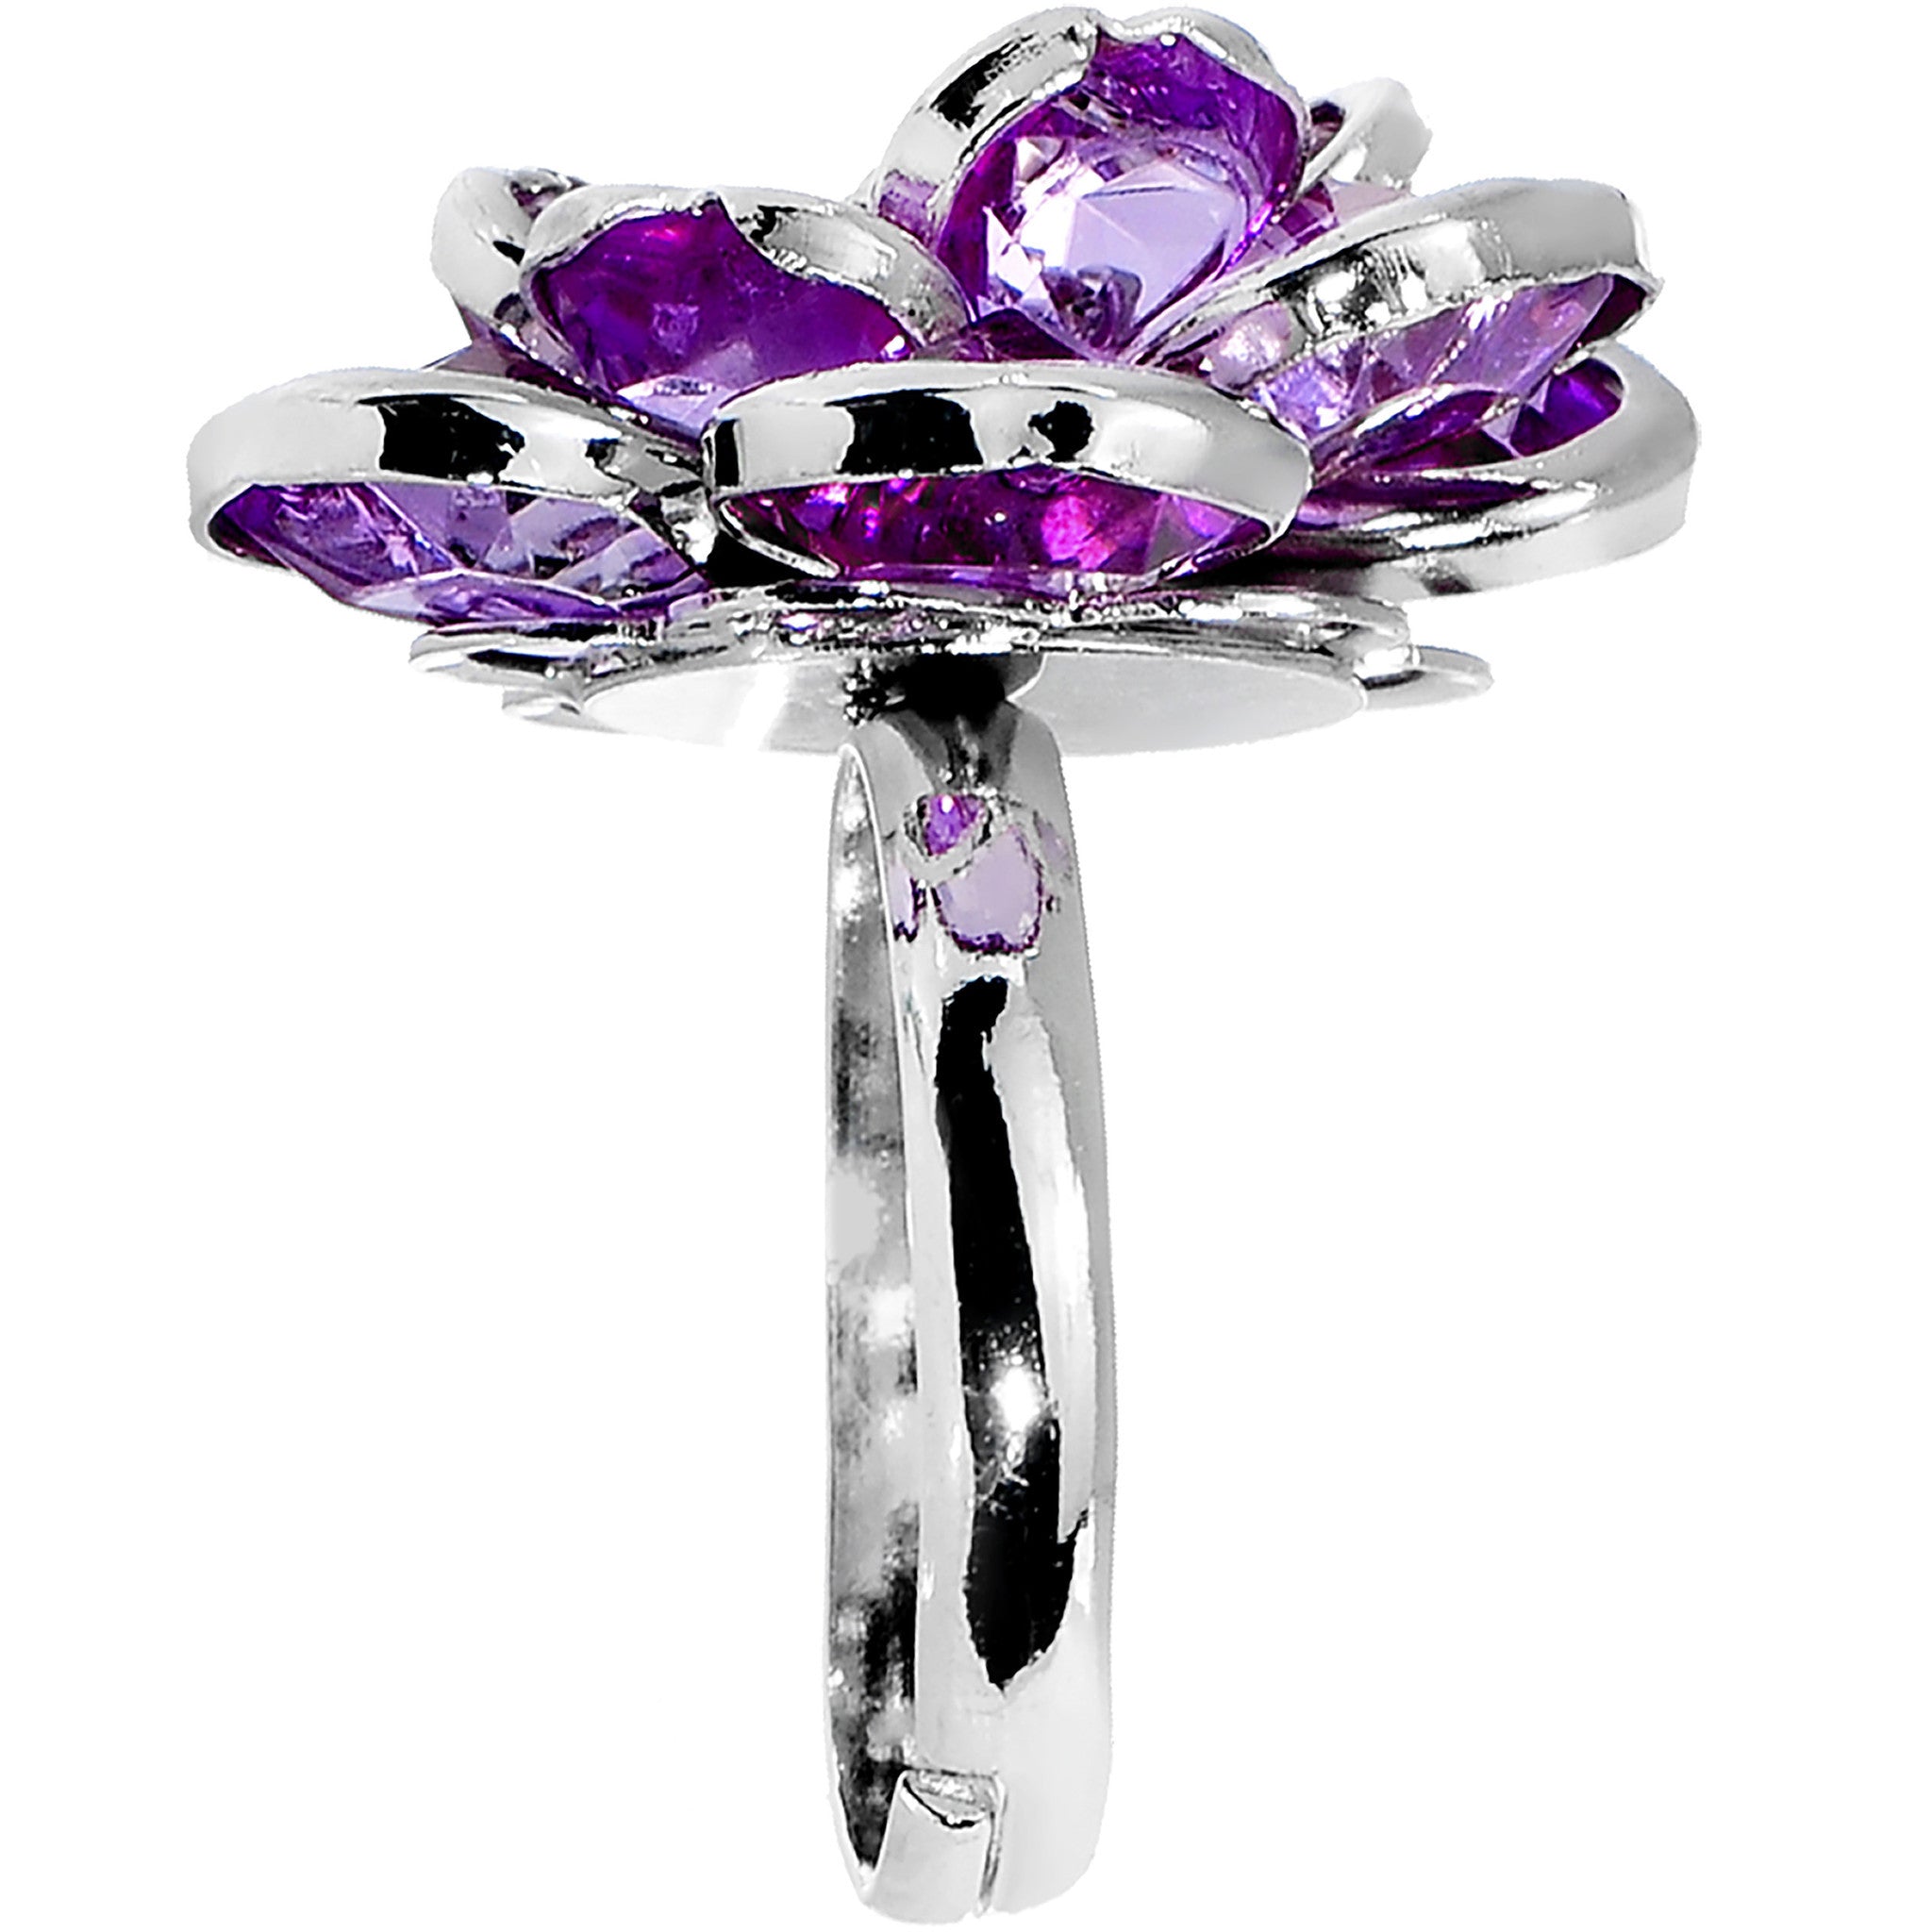 Small Purple Faceted Blooming Flower Adjustable Ring